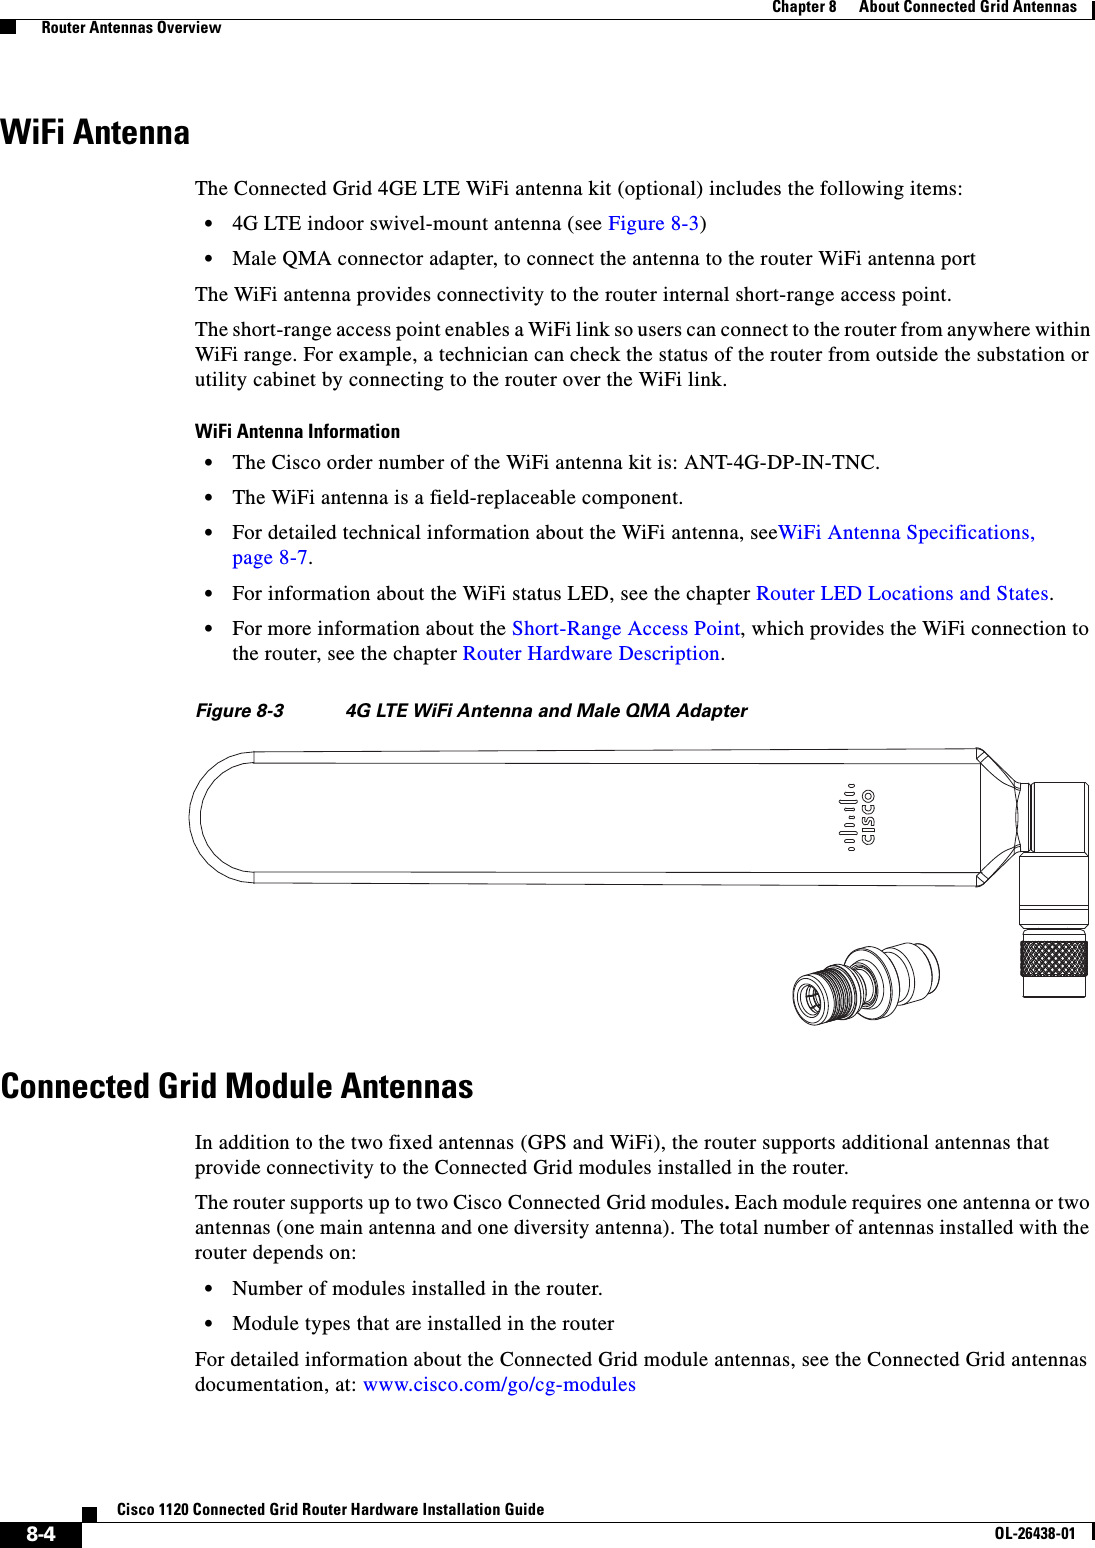  8-4Cisco 1120 Connected Grid Router Hardware Installation GuideOL-26438-01Chapter 8      About Connected Grid Antennas  Router Antennas OverviewWiFi AntennaThe Connected Grid 4GE LTE WiFi antenna kit (optional) includes the following items:•4G LTE indoor swivel-mount antenna (see Figure 8-3)•Male QMA connector adapter, to connect the antenna to the router WiFi antenna portThe WiFi antenna provides connectivity to the router internal short-range access point. The short-range access point enables a WiFi link so users can connect to the router from anywhere within WiFi range. For example, a technician can check the status of the router from outside the substation or utility cabinet by connecting to the router over the WiFi link.WiFi Antenna Information•The Cisco order number of the WiFi antenna kit is: ANT-4G-DP-IN-TNC.•The WiFi antenna is a field-replaceable component.•For detailed technical information about the WiFi antenna, seeWiFi Antenna Specifications, page 8-7. •For information about the WiFi status LED, see the chapter Router LED Locations and States.•For more information about the Short-Range Access Point, which provides the WiFi connection to the router, see the chapter Router Hardware Description.Figure 8-3 4G LTE WiFi Antenna and Male QMA AdapterConnected Grid Module AntennasIn addition to the two fixed antennas (GPS and WiFi), the router supports additional antennas that provide connectivity to the Connected Grid modules installed in the router. The router supports up to two Cisco Connected Grid modules. Each module requires one antenna or two antennas (one main antenna and one diversity antenna). The total number of antennas installed with the router depends on:•Number of modules installed in the router.•Module types that are installed in the routerFor detailed information about the Connected Grid module antennas, see the Connected Grid antennas documentation, at: www.cisco.com/go/cg-modules 